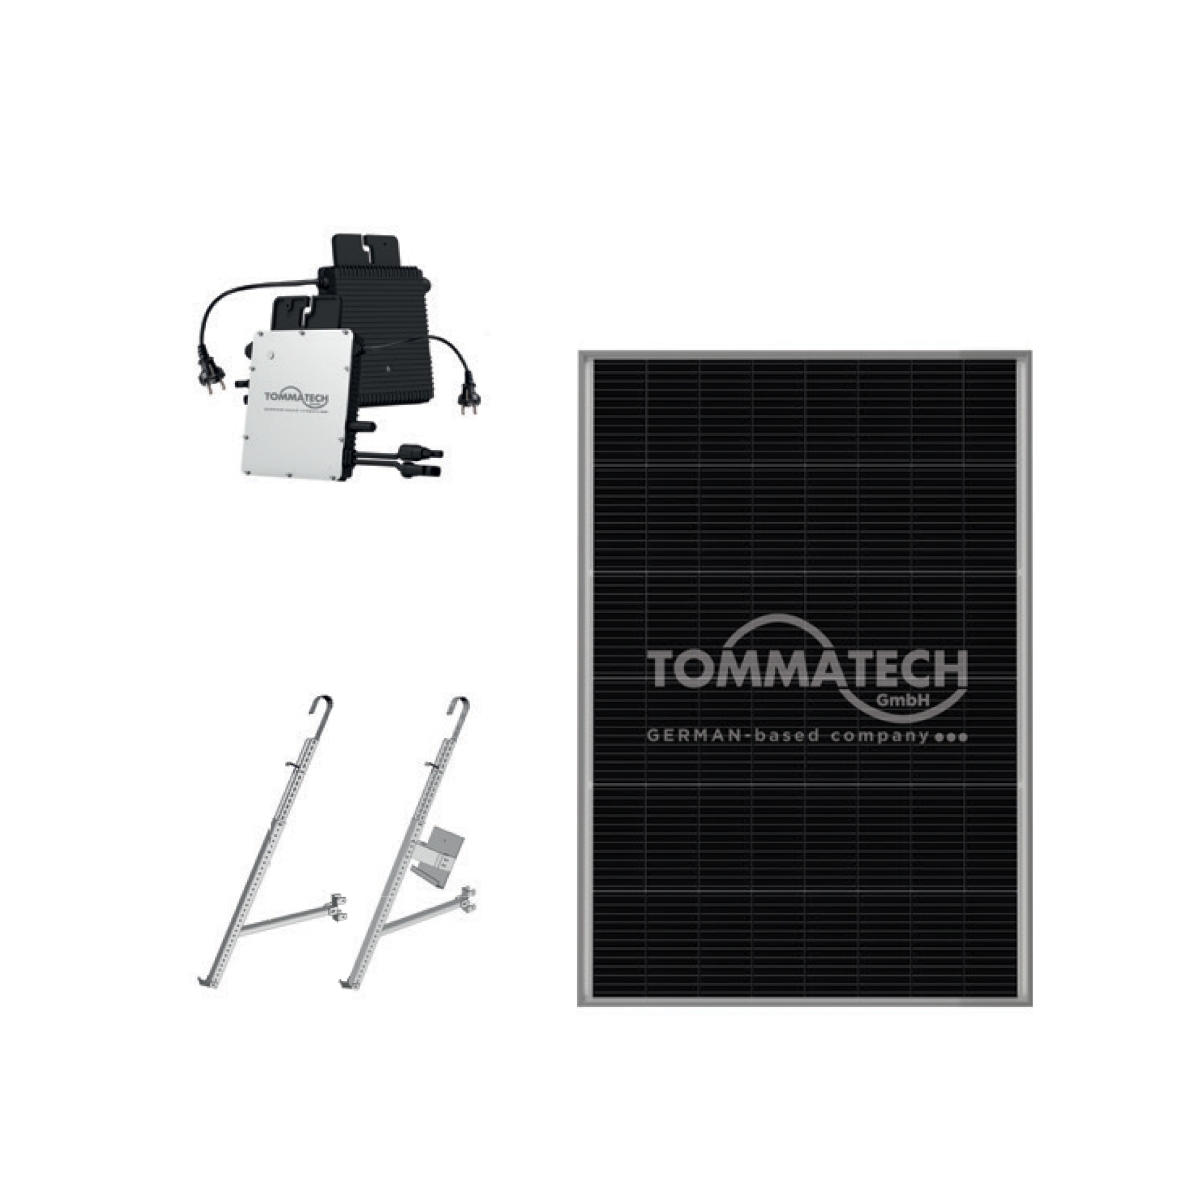 TommaTech 300We 1x240Wp Micro Inverter Package